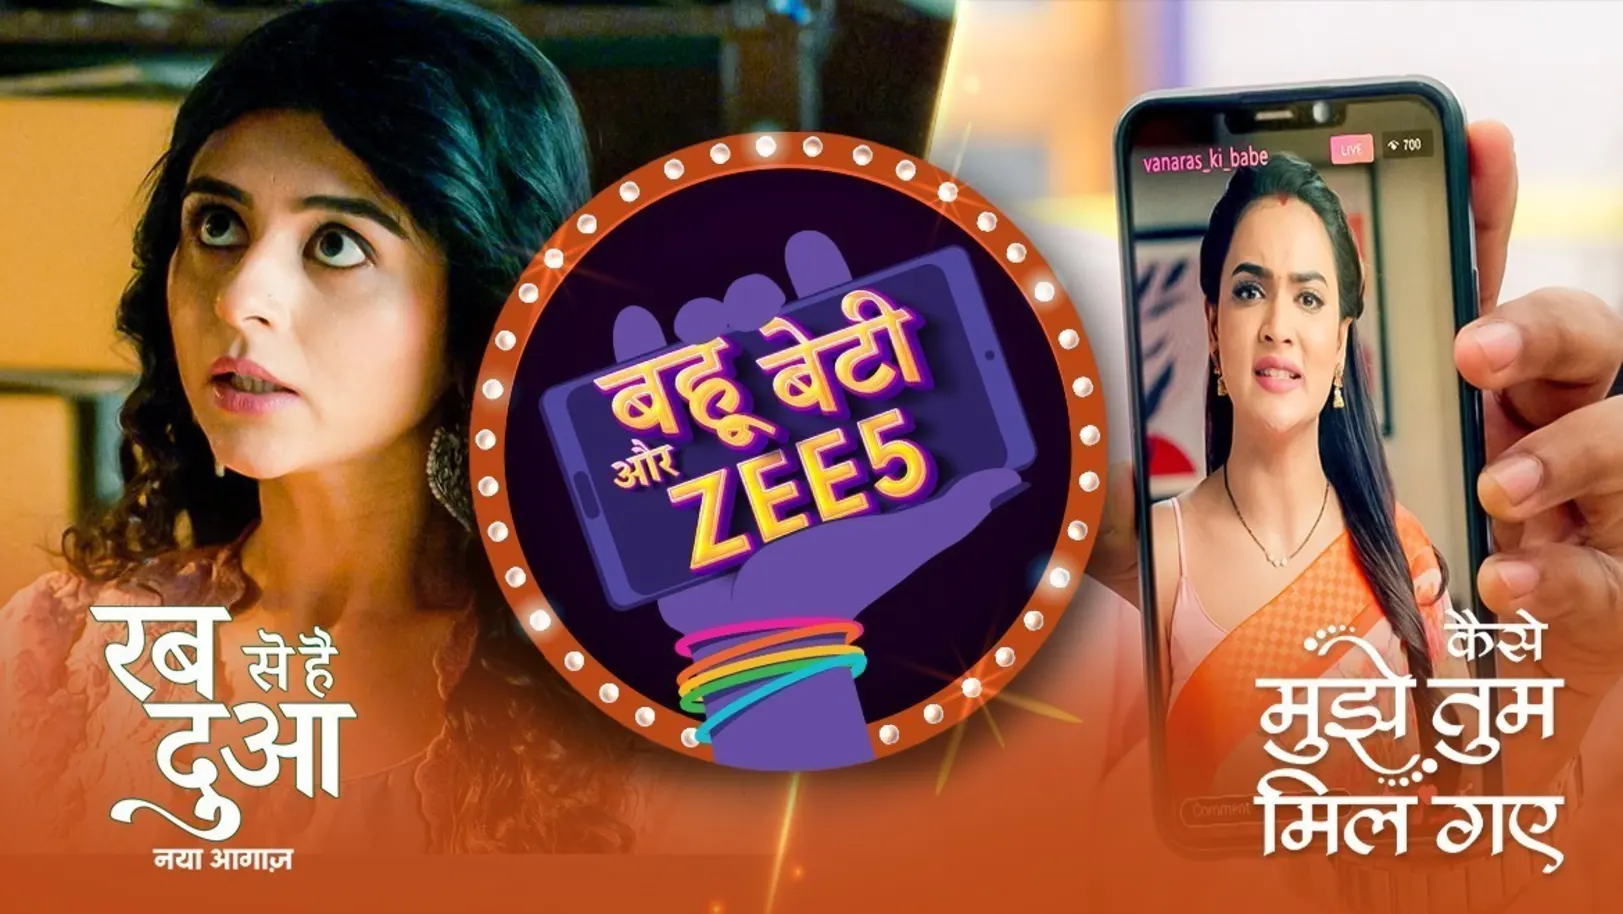 The Interesting Twists in Relationships | Behind the Scenes | Bahu Beti Aur ZEE5 Episode 12